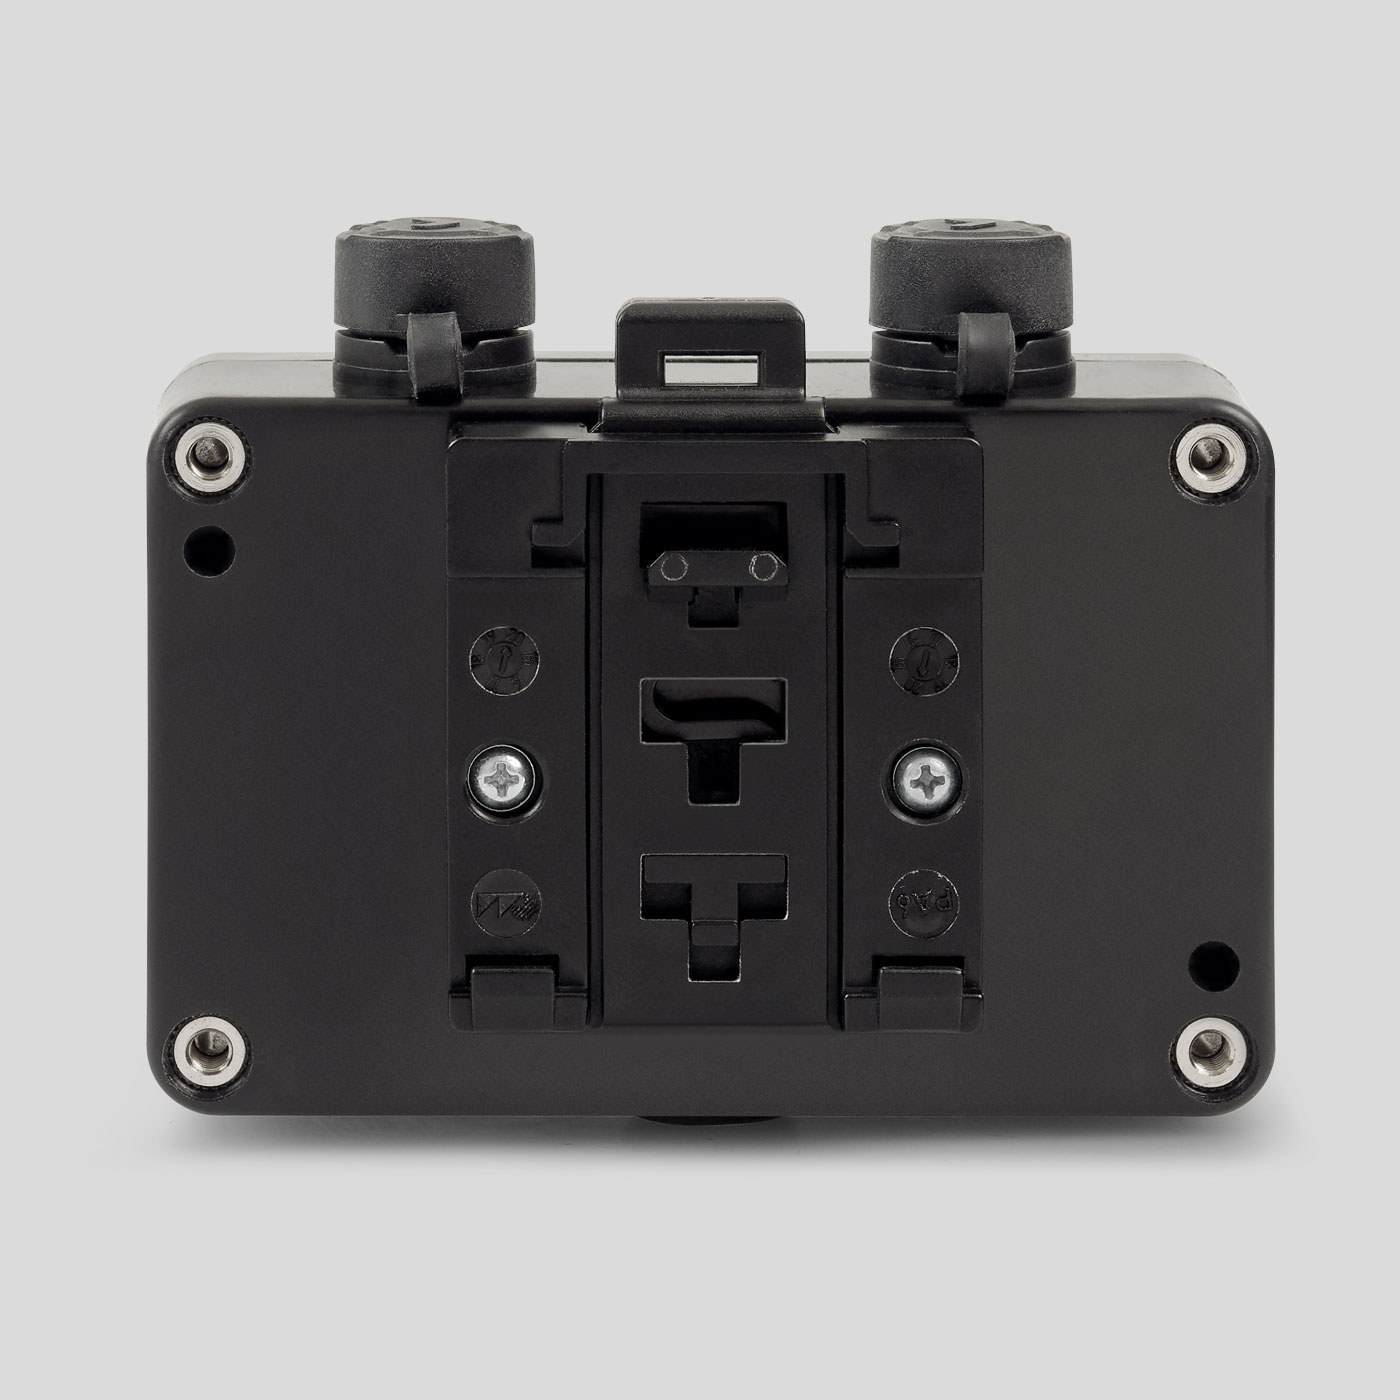 A screw-on DIN rail holder is optionally available